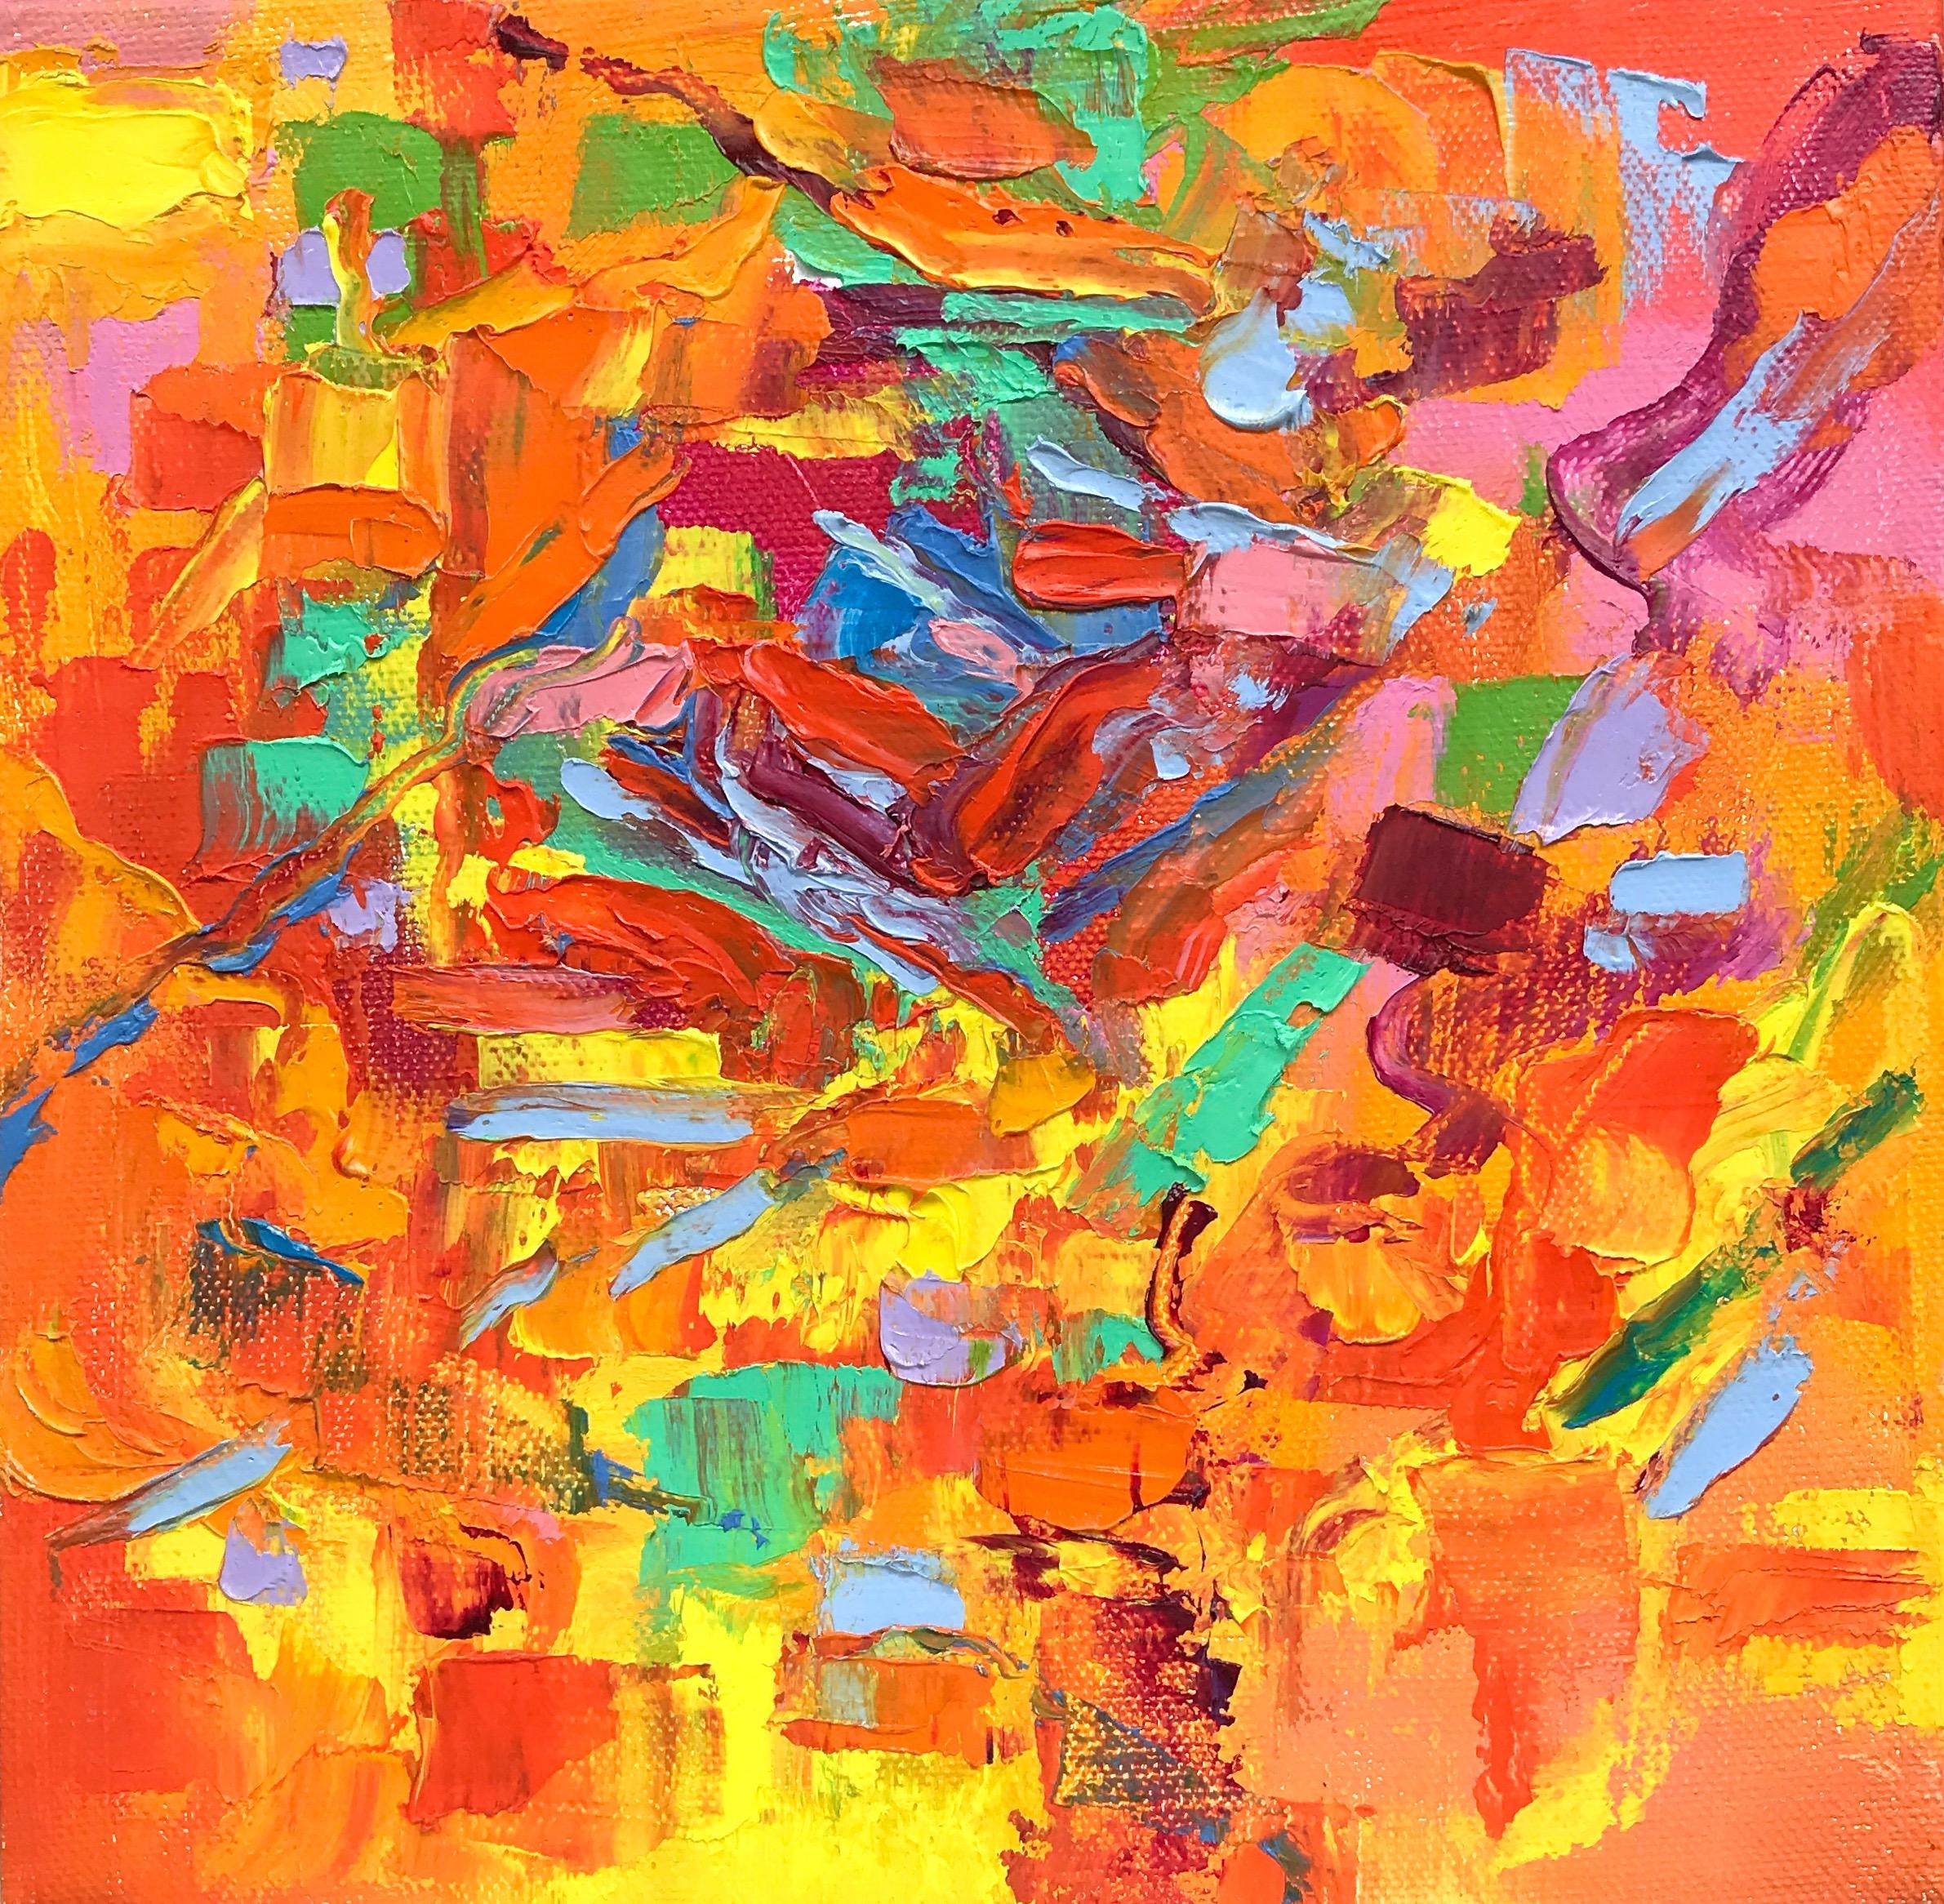 Linda Holt Abstract Painting - "Small Abstract #110"   Vivid Expressionist Oil Orange, Yellow, Pink, Green, Red